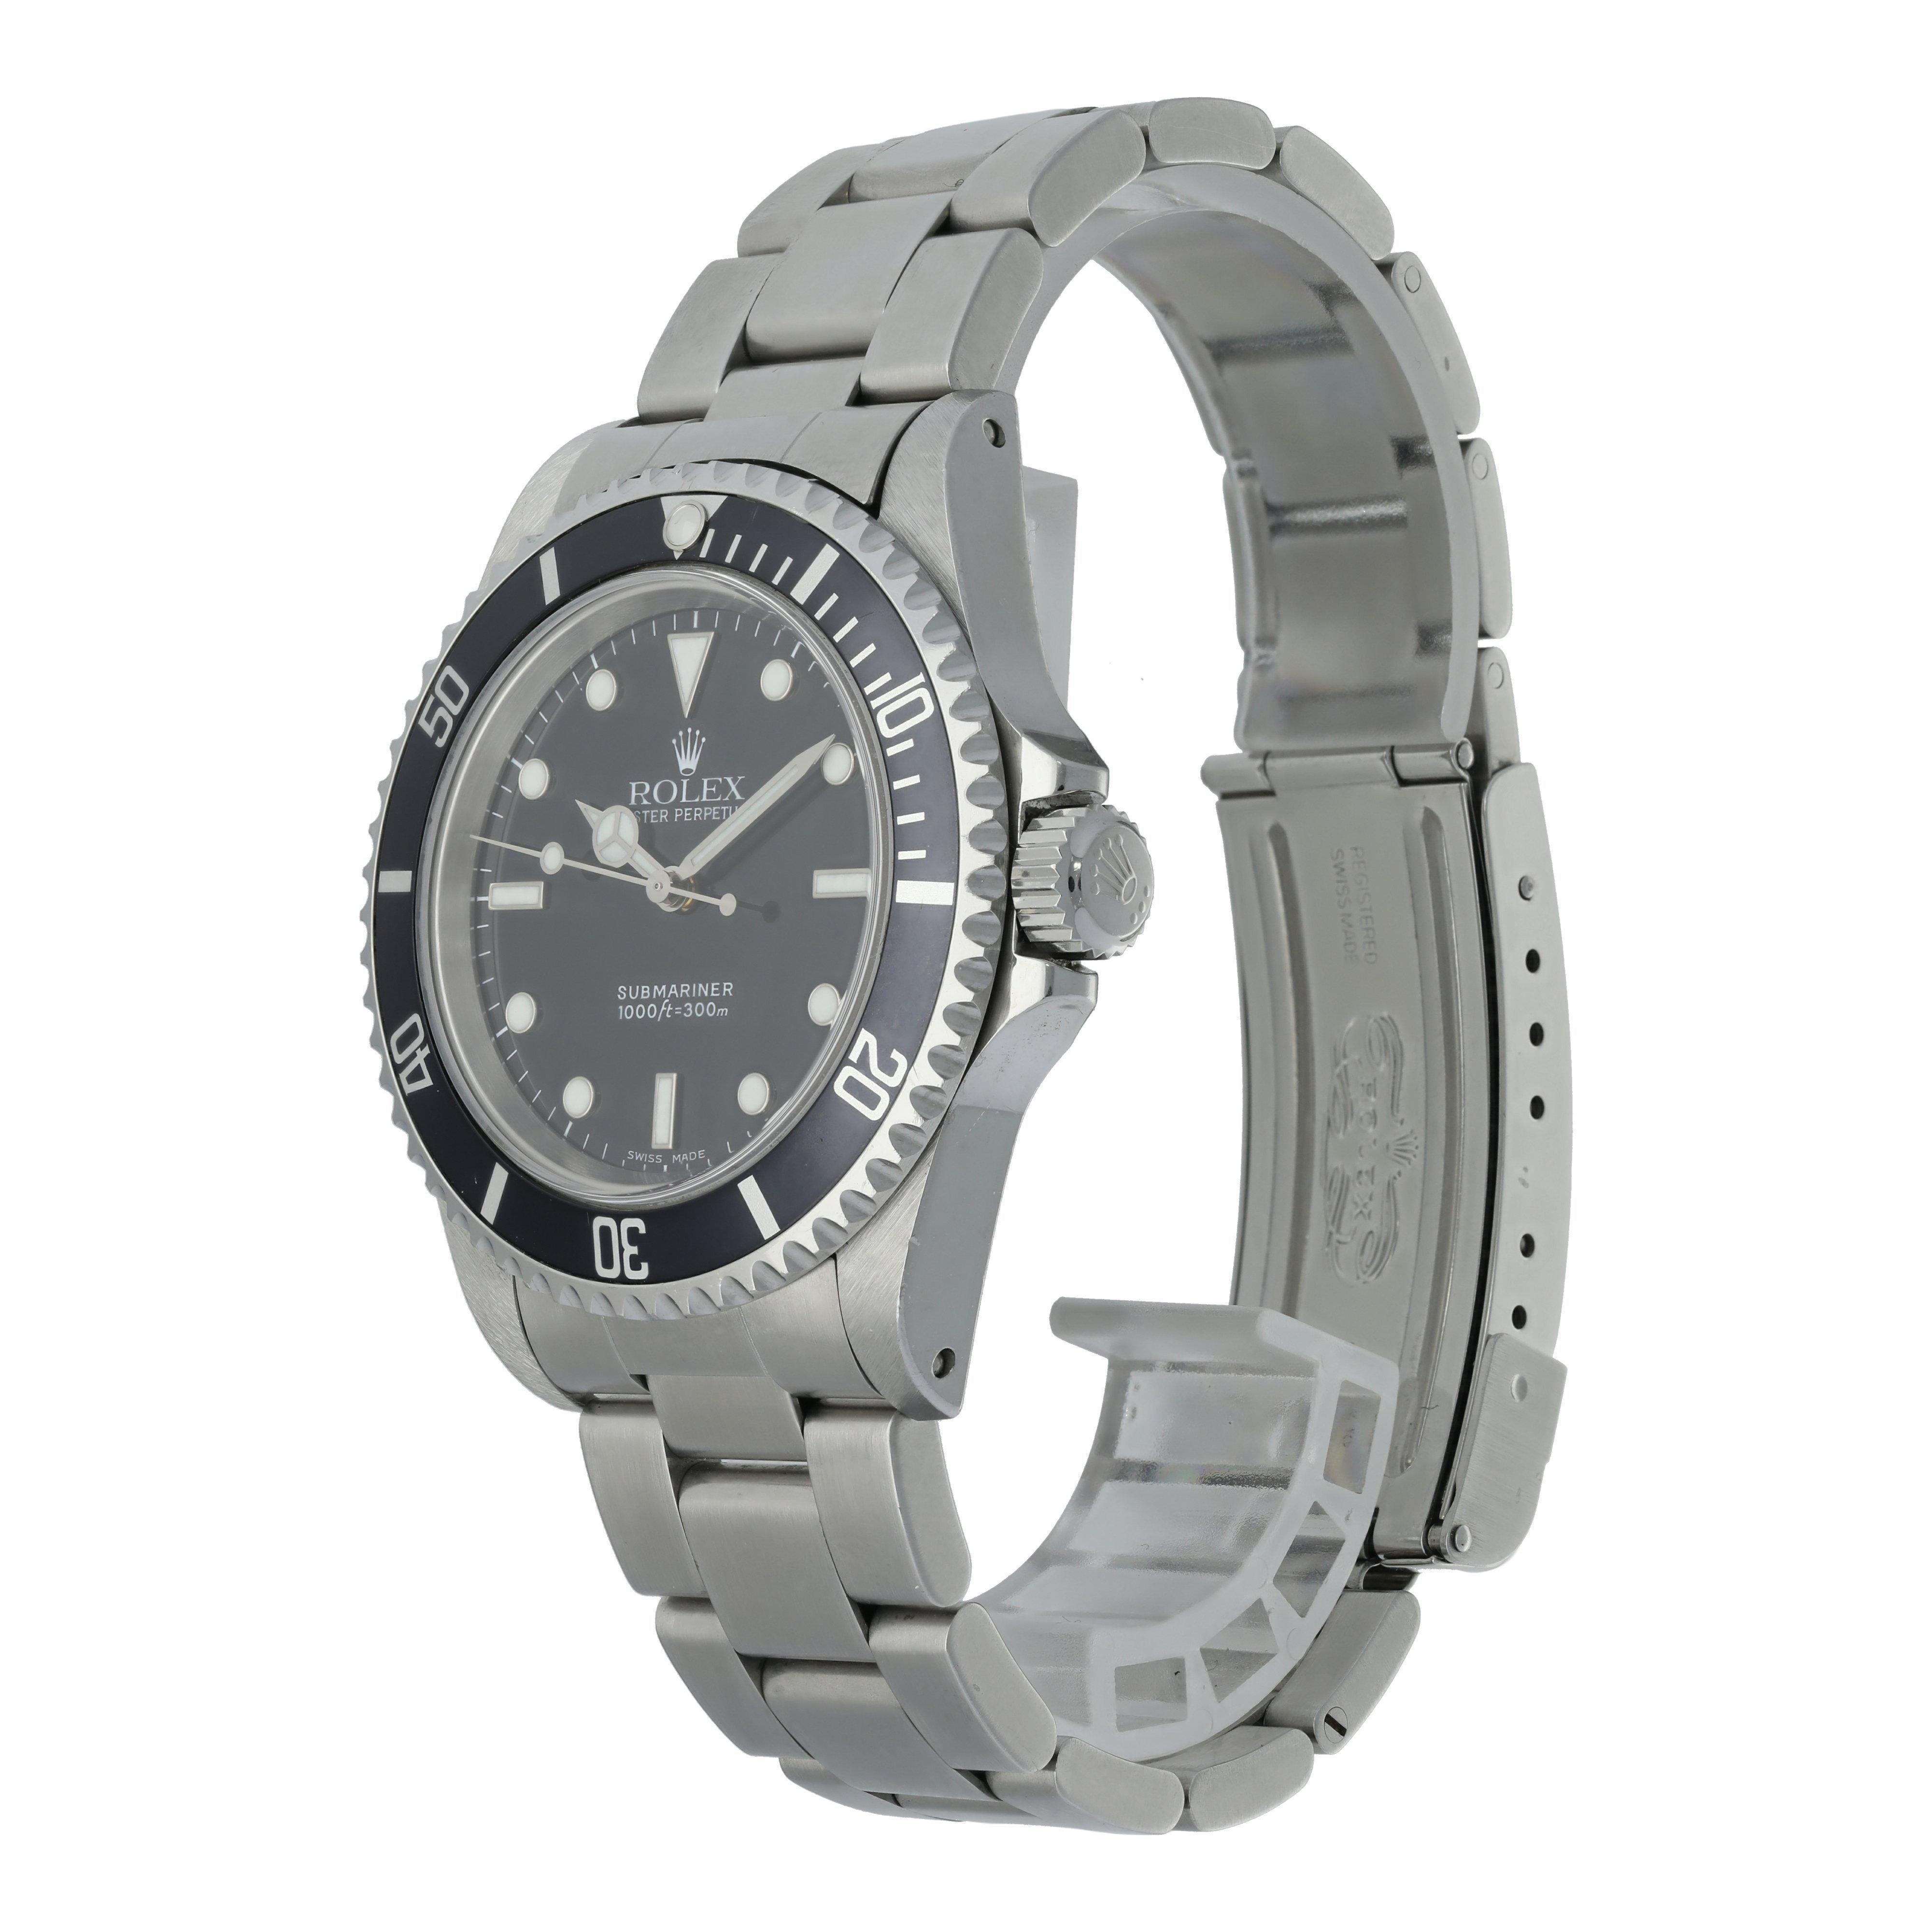 Rolex Submariner 14060 Men's Watch In Excellent Condition For Sale In New York, NY